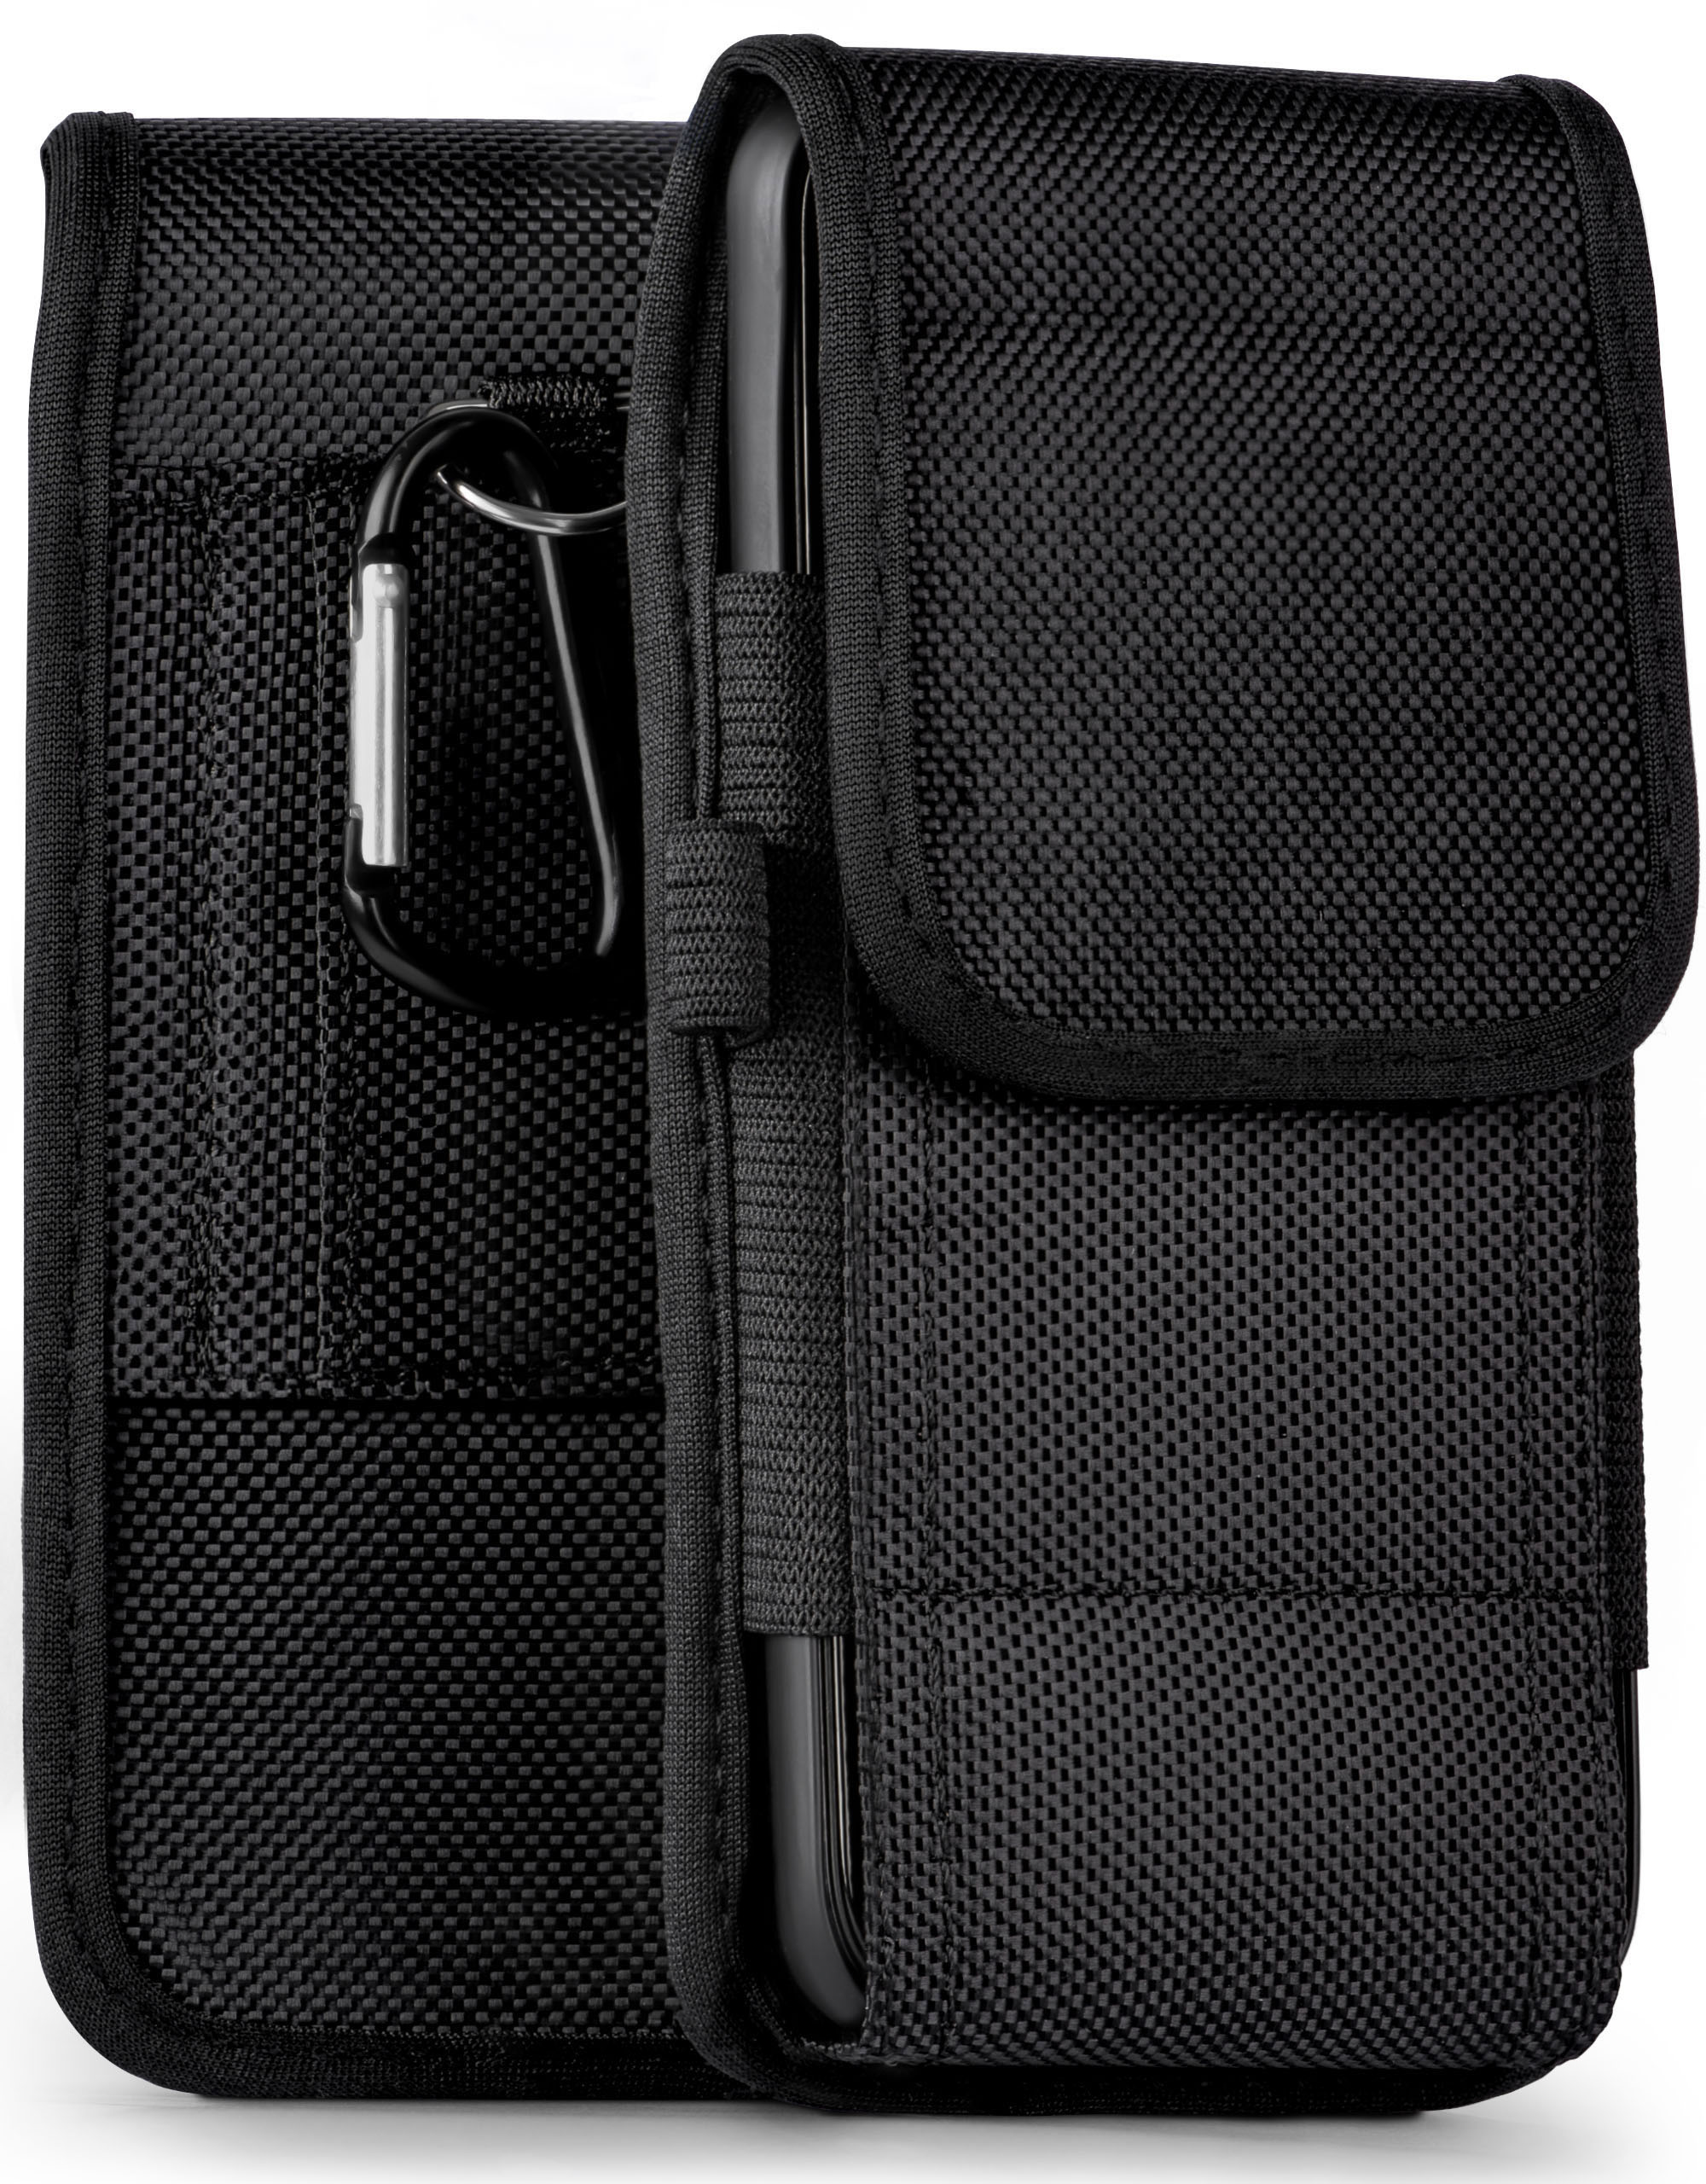 Agility MOEX 12 Plus, Case, Trail Holster, Desire HTC,